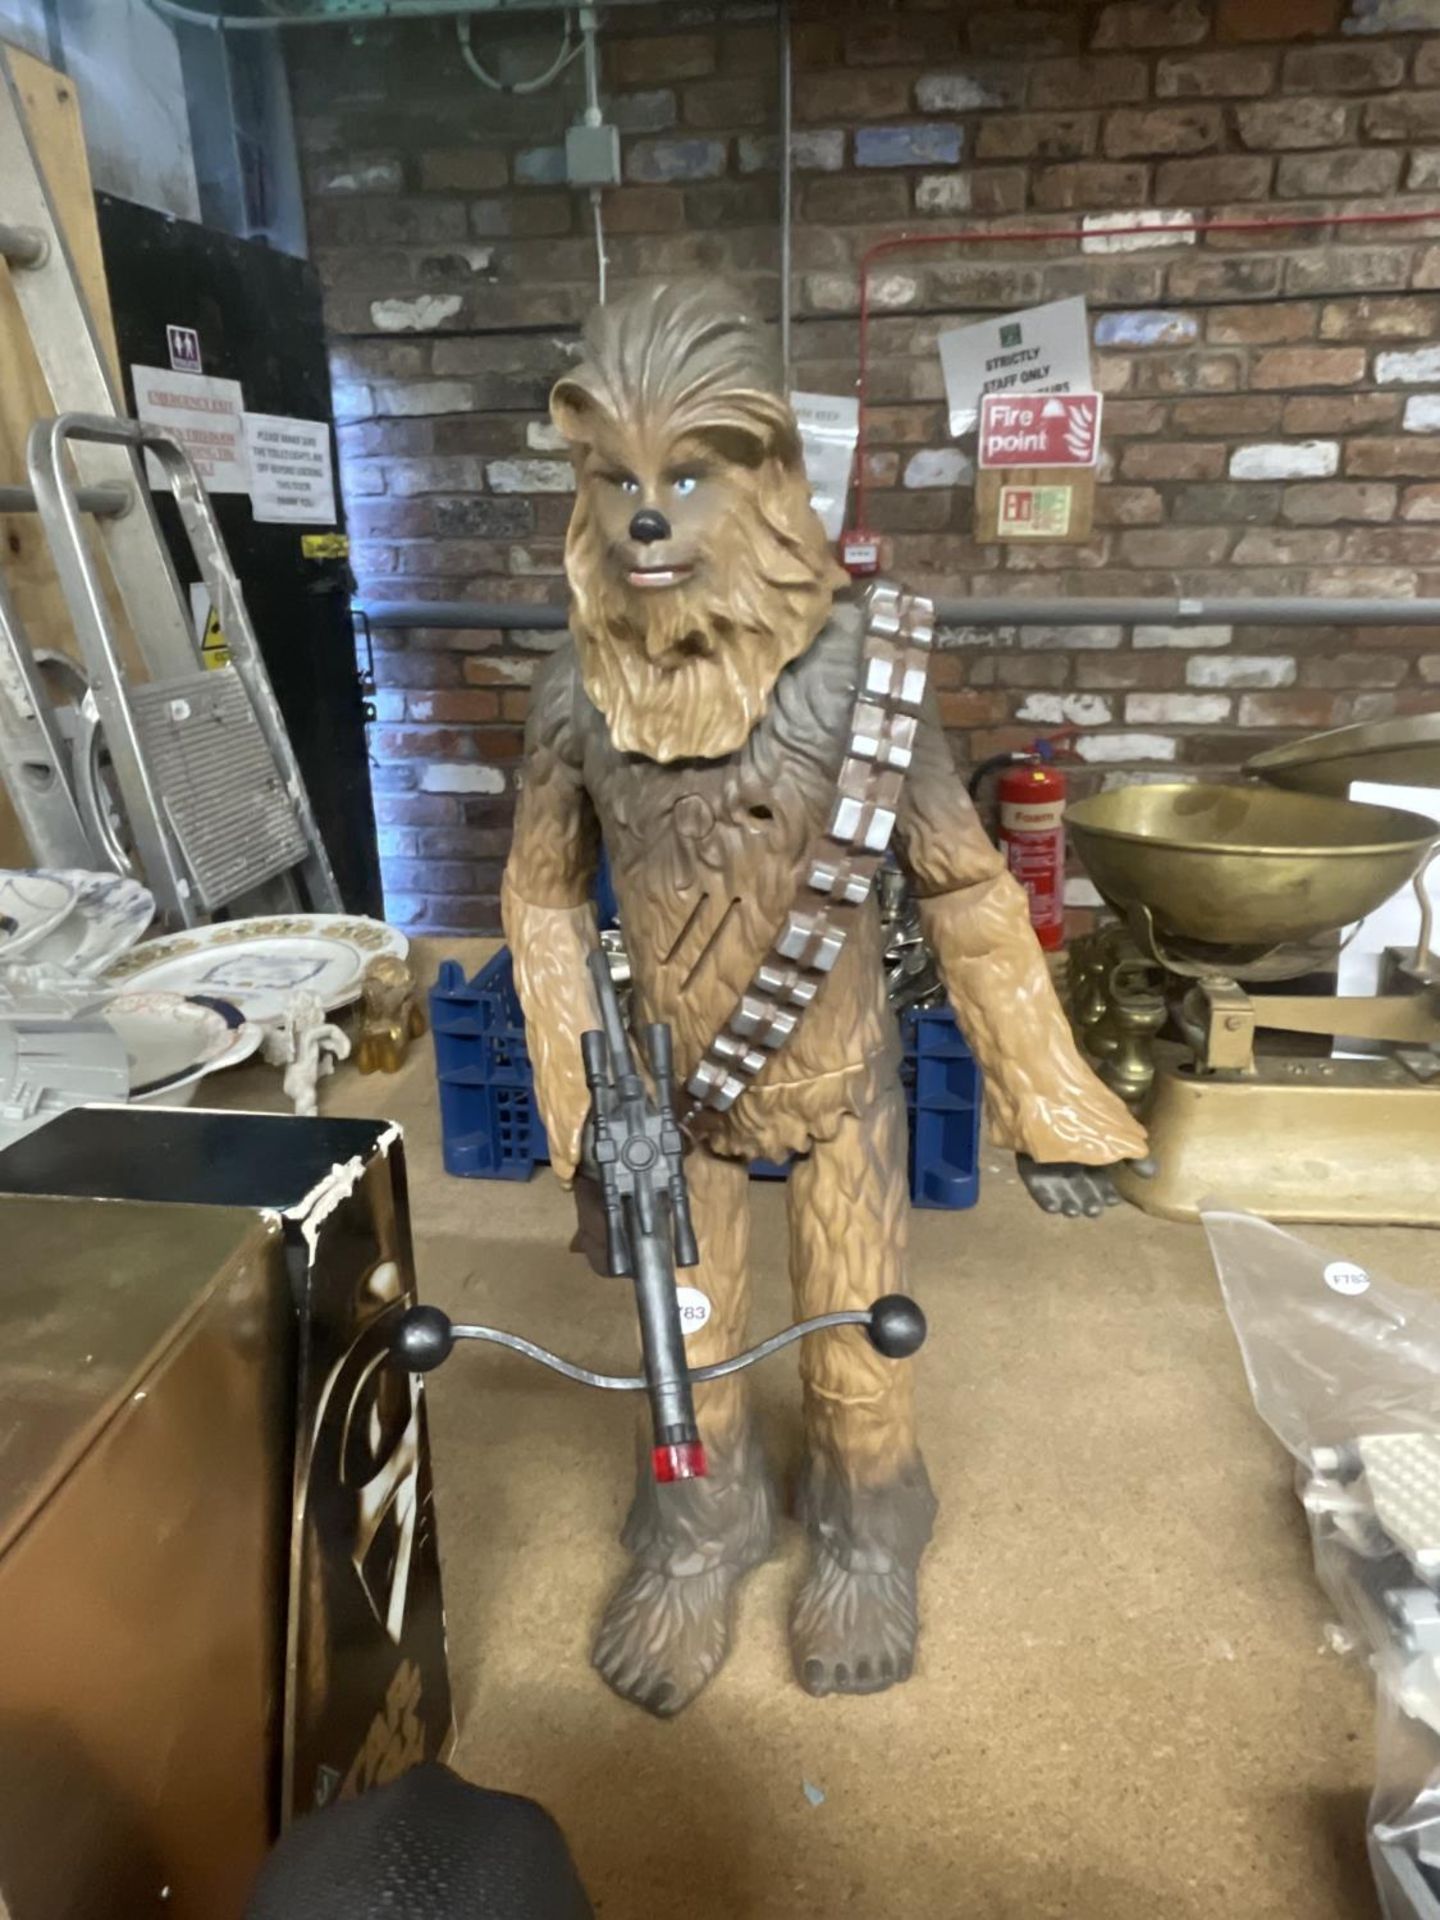 A COLELCTION OF STAR WARS ITEMS TO INCLUDE A CHEWBACCA MODEL, R2D2 MODEL TO PLUG IN TO A COMPUTER, A - Image 4 of 4